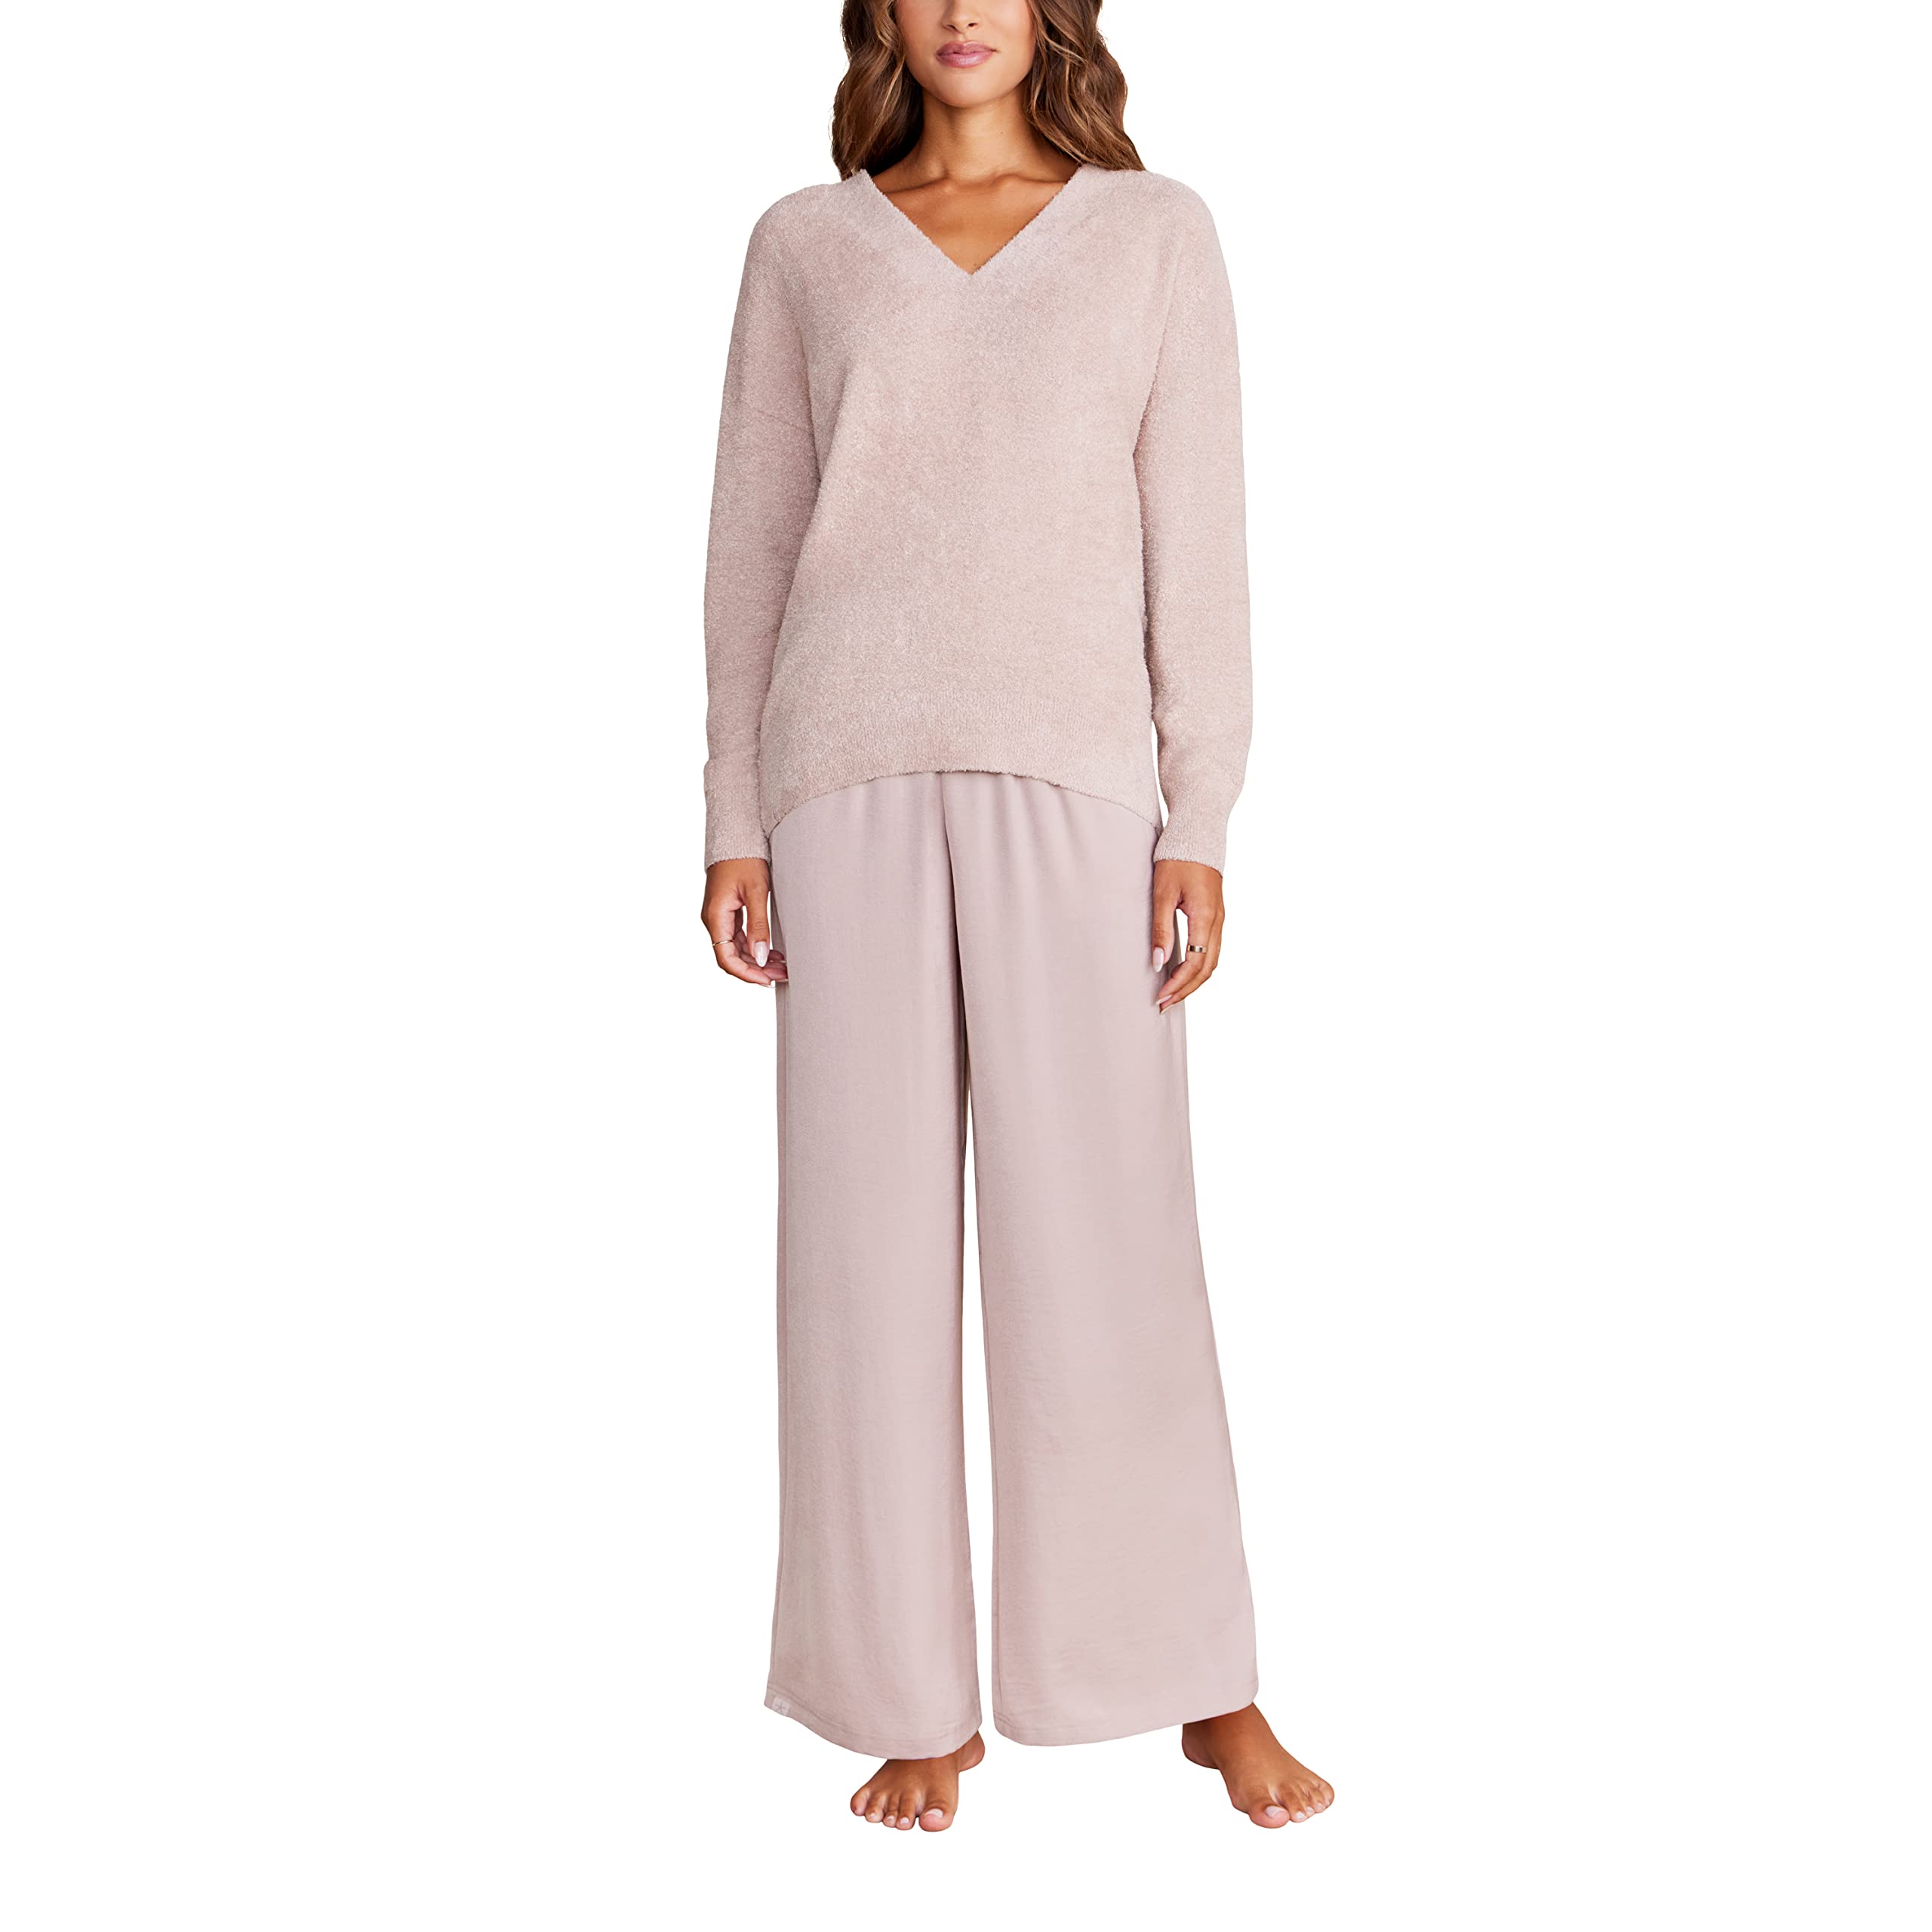 Barefoot Dreams CozyChic Lite V-Neck Seamed Pullover, Women’s Pullover, Great for Gym, Super Soft Sweater